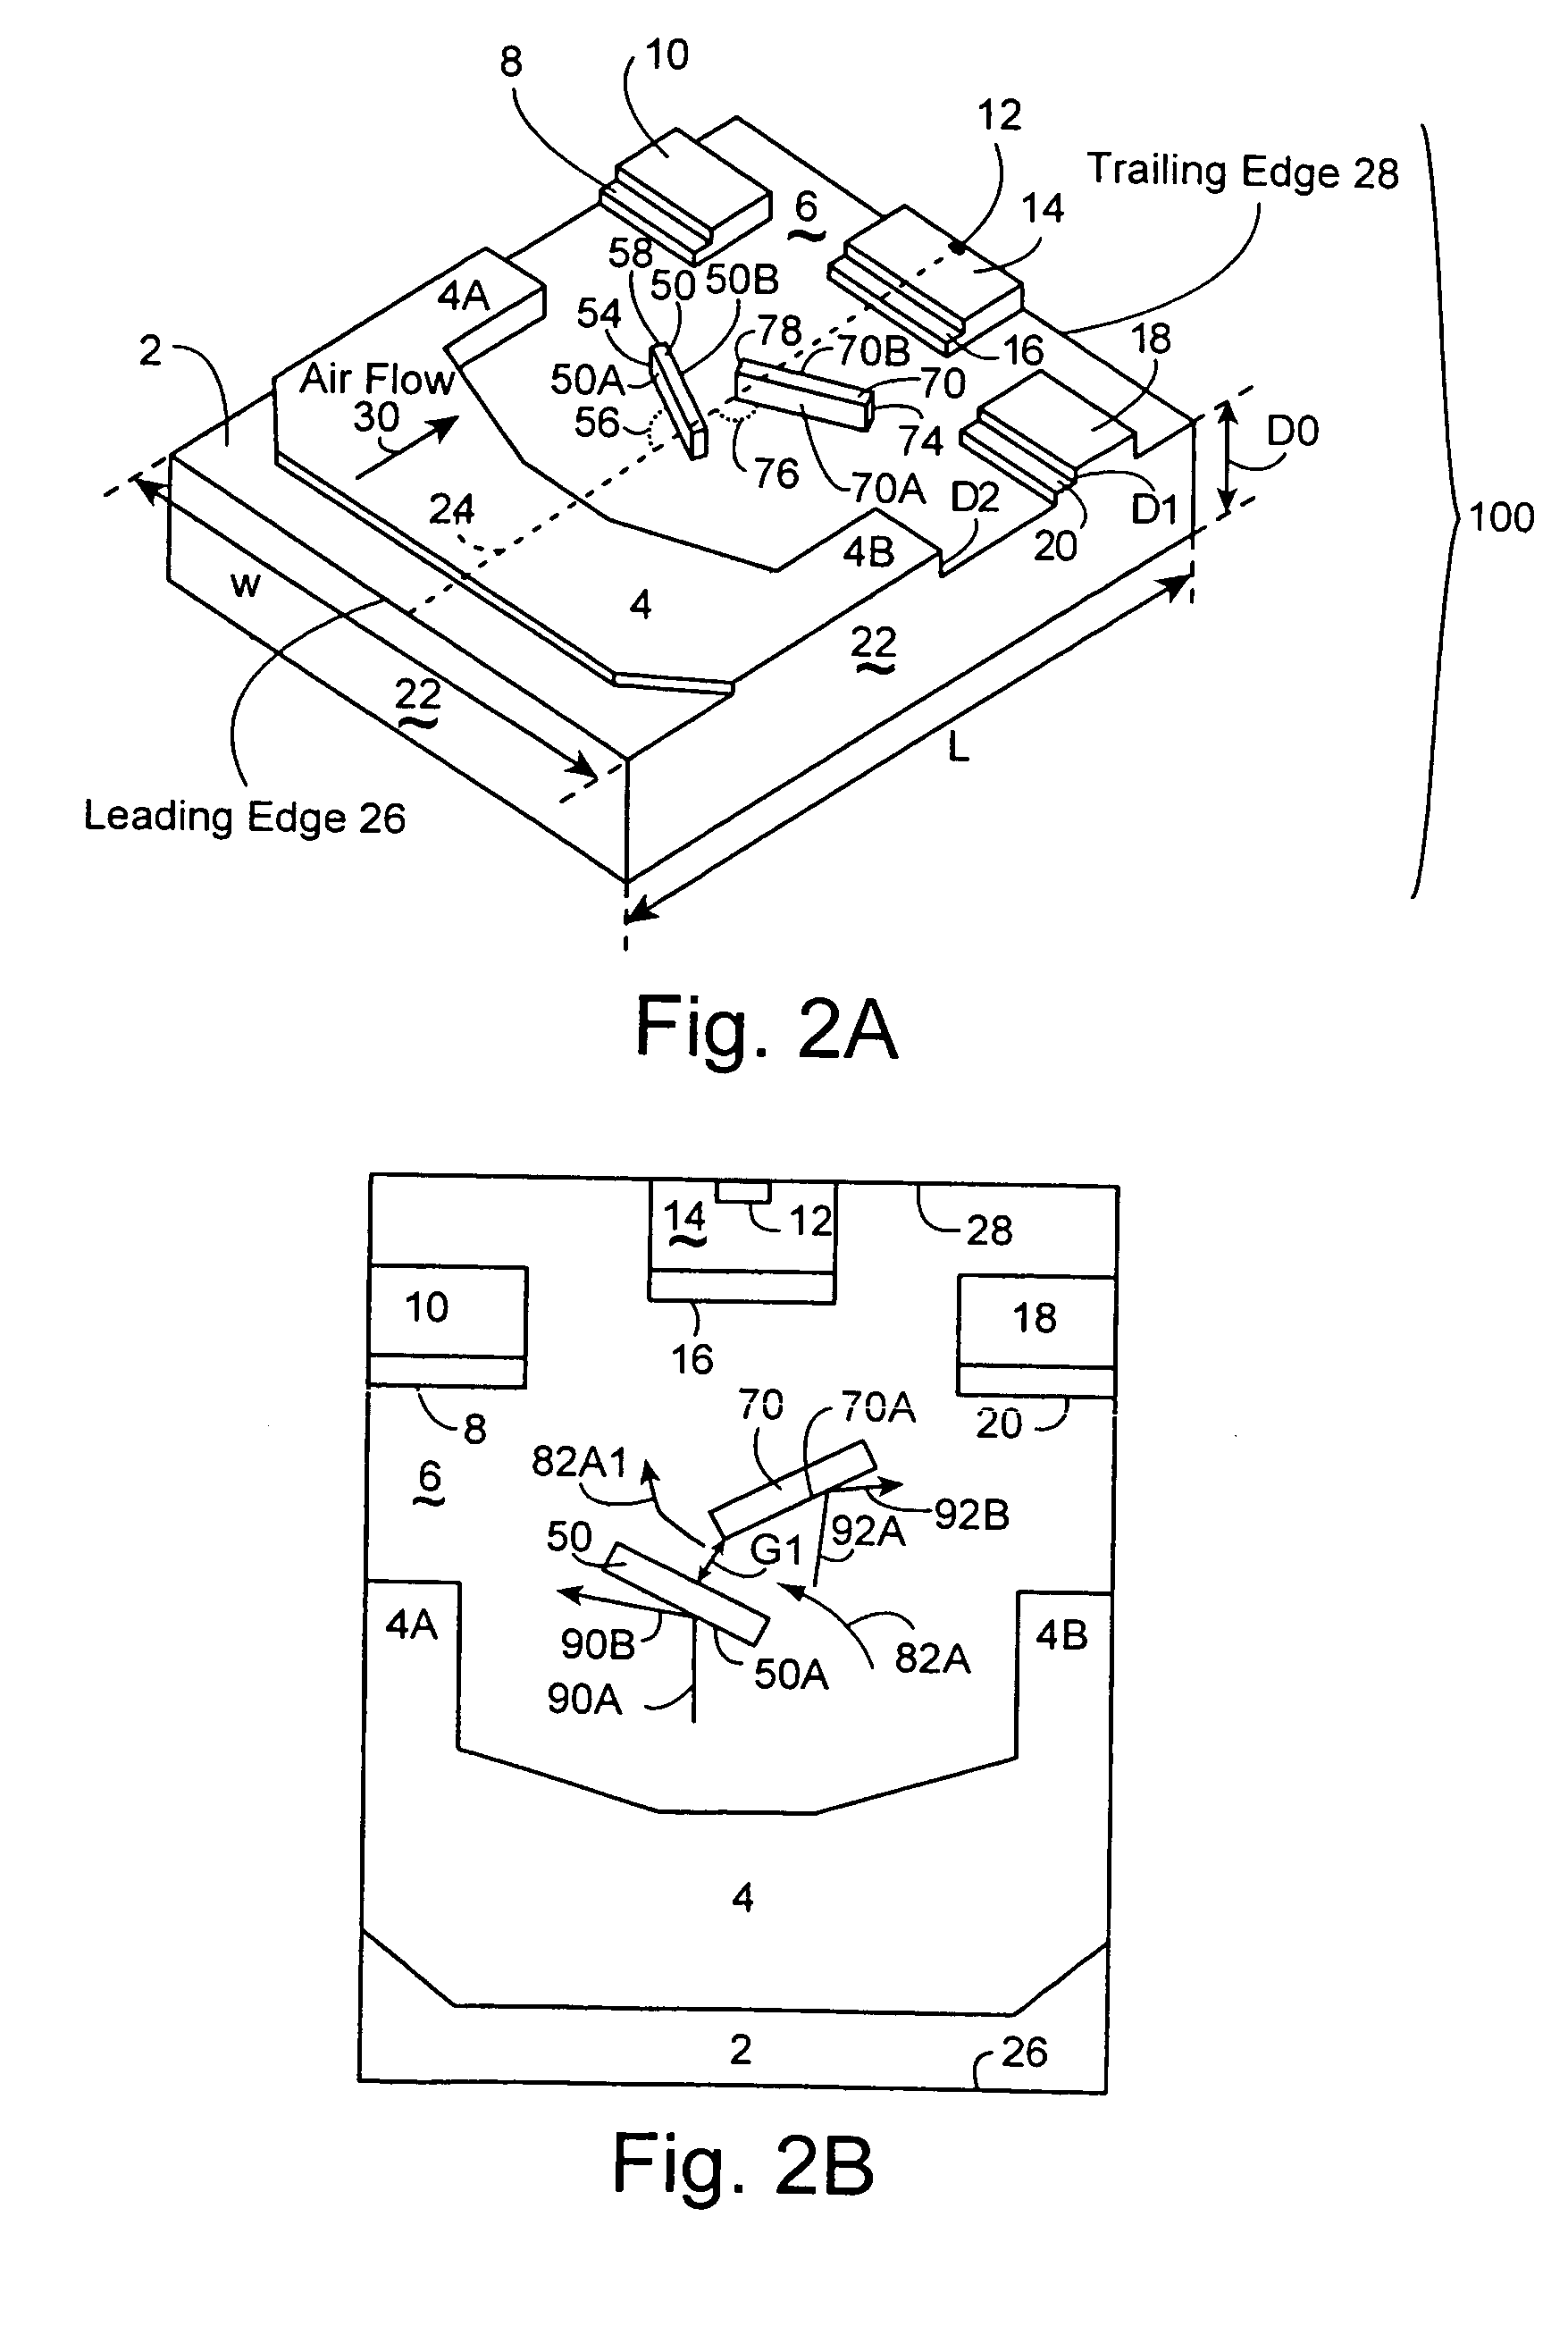 Method and apparatus supporting a slider having multiple deflection rails in a negative pressure pocket for a hard disk drive